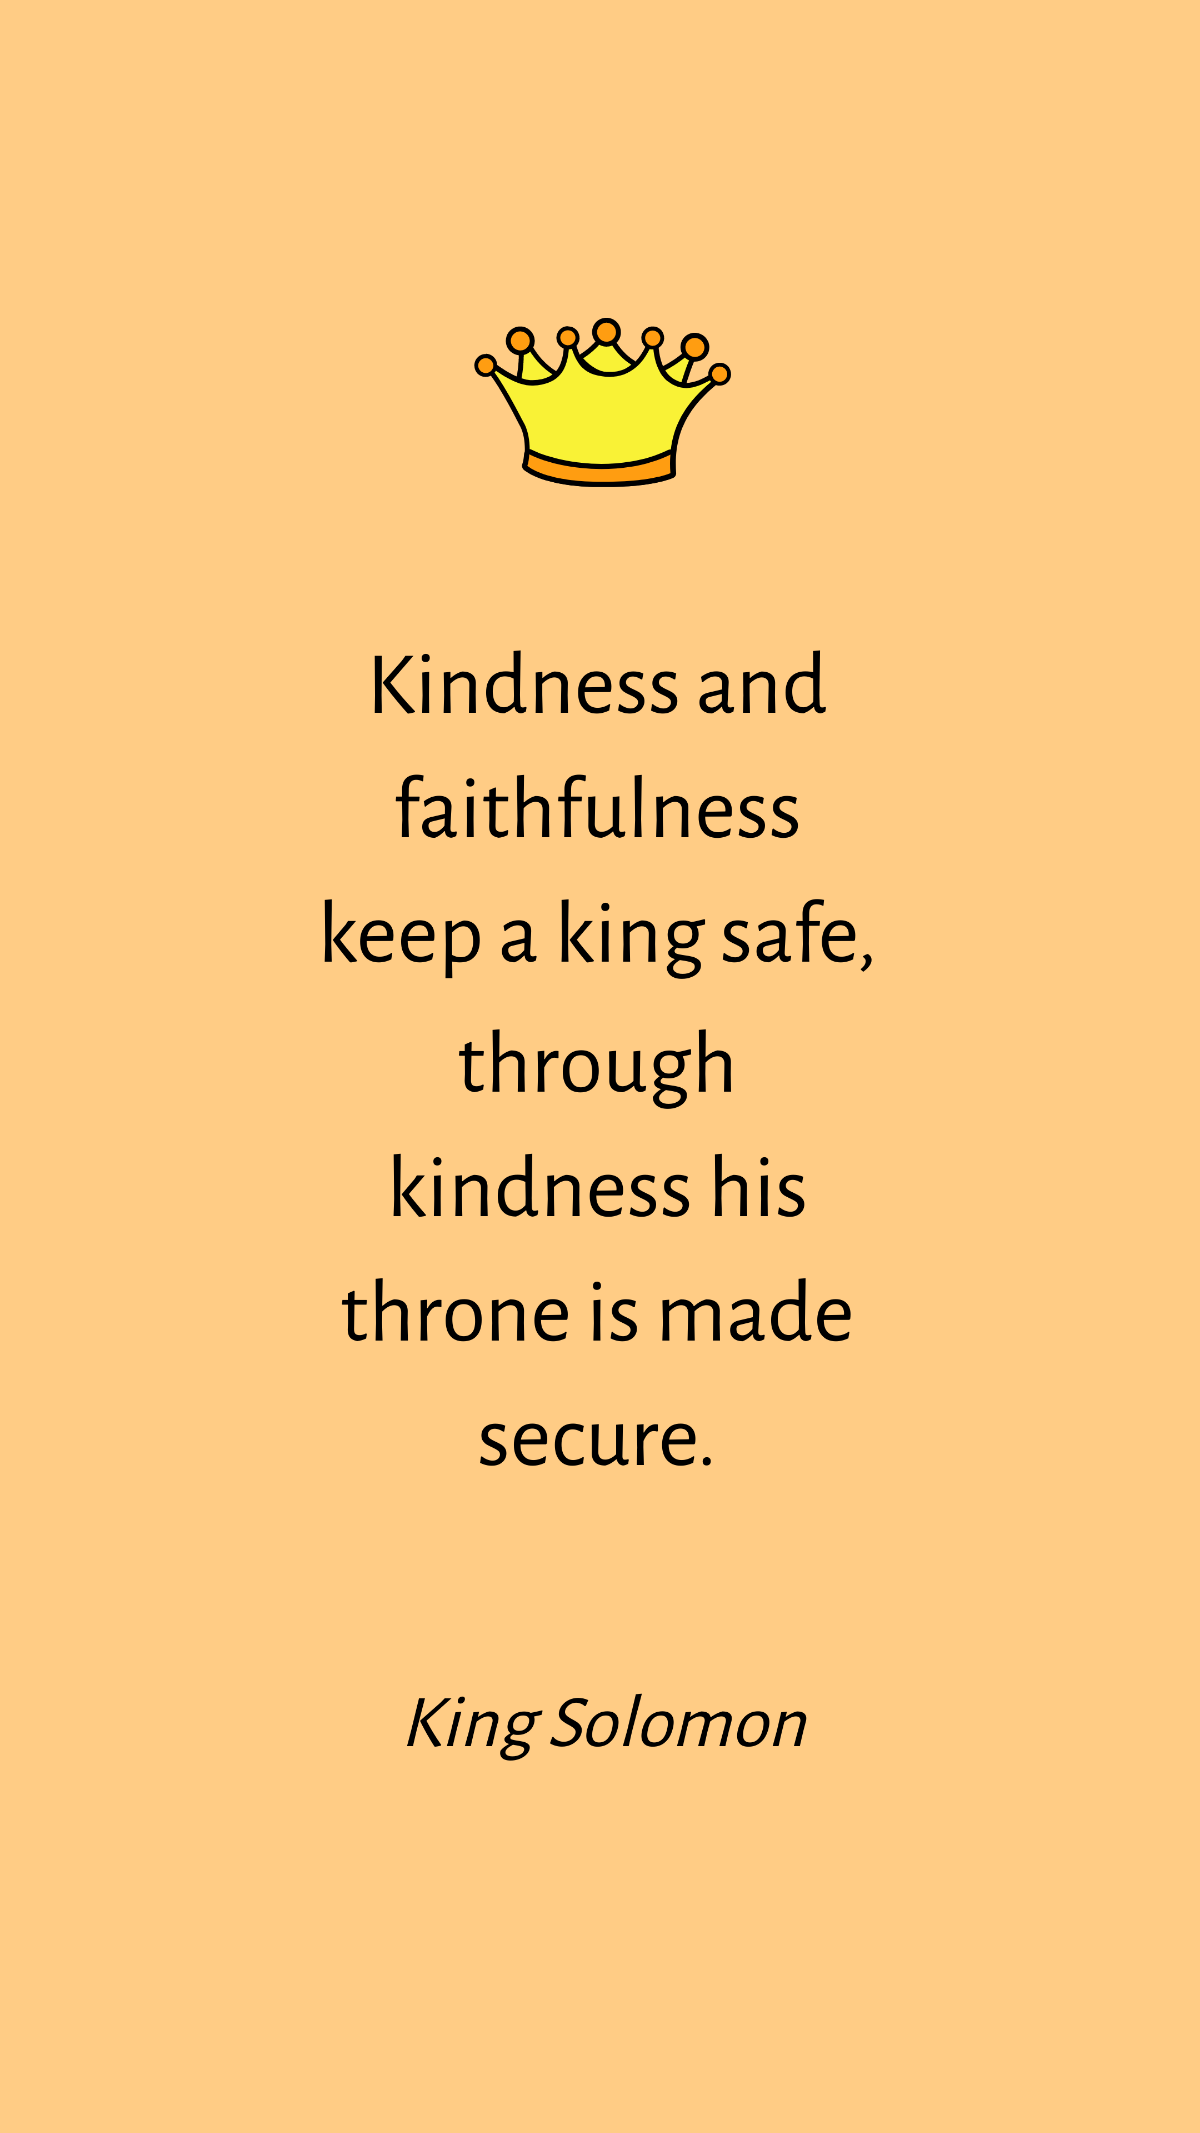 Free King Solomon - Kindness and faithfulness keep a king safe, through kindness his throne is made secure. Template